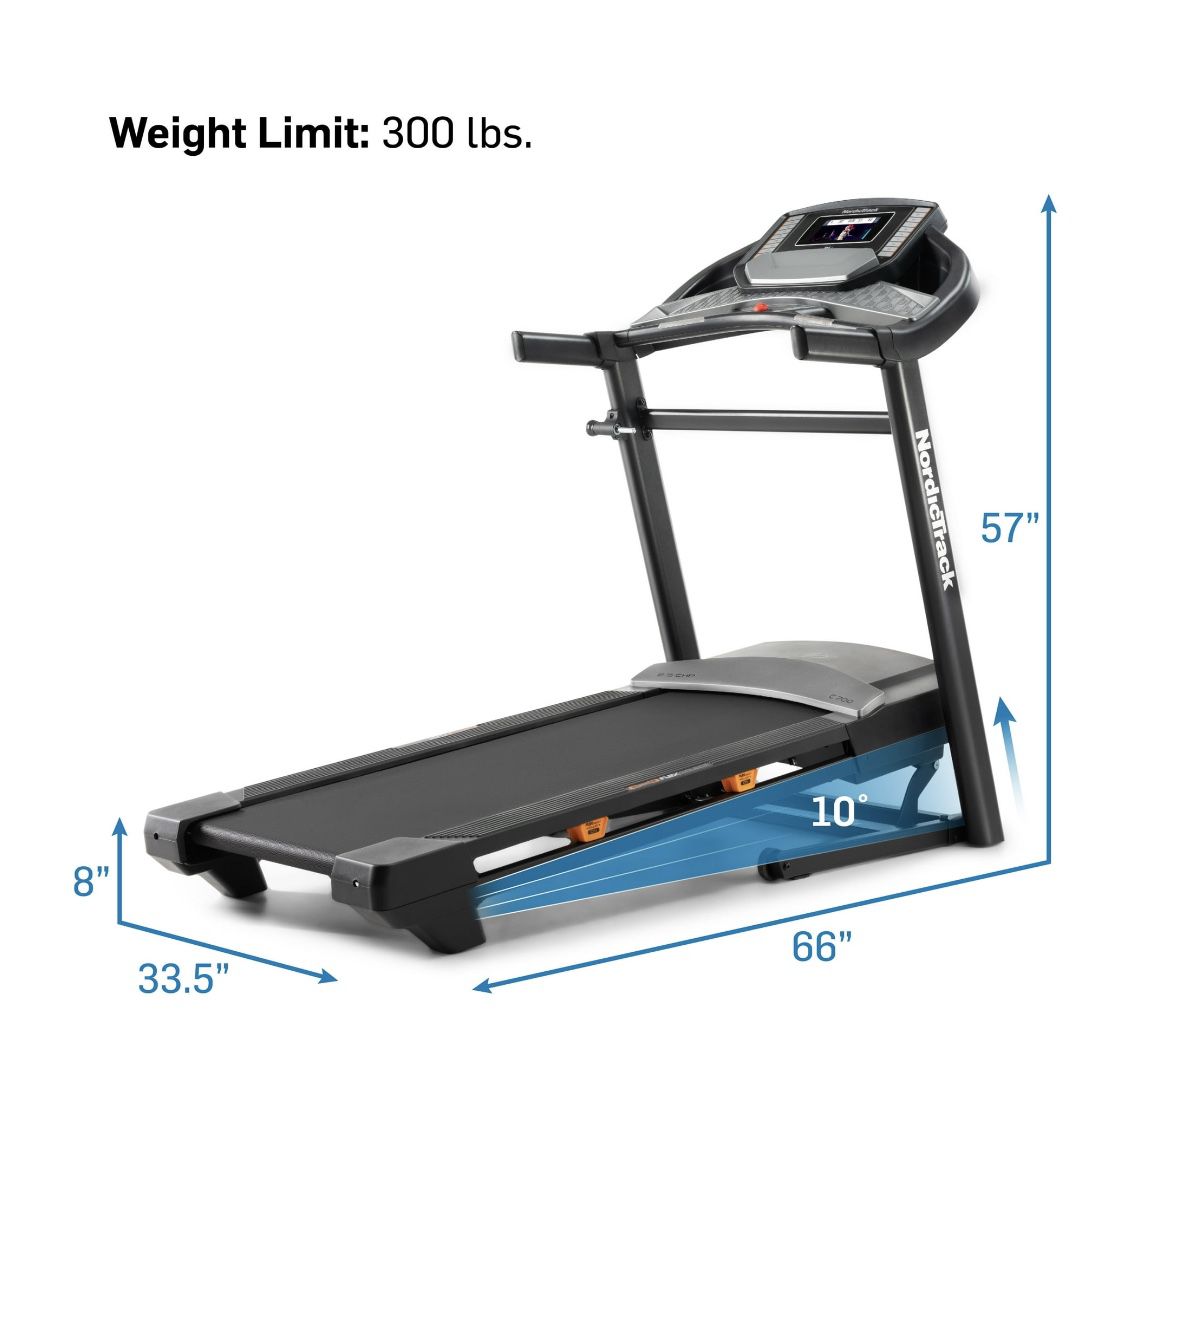 NordicTrack C 700 Folding Treadmill with 7” Interactive Touchscreen